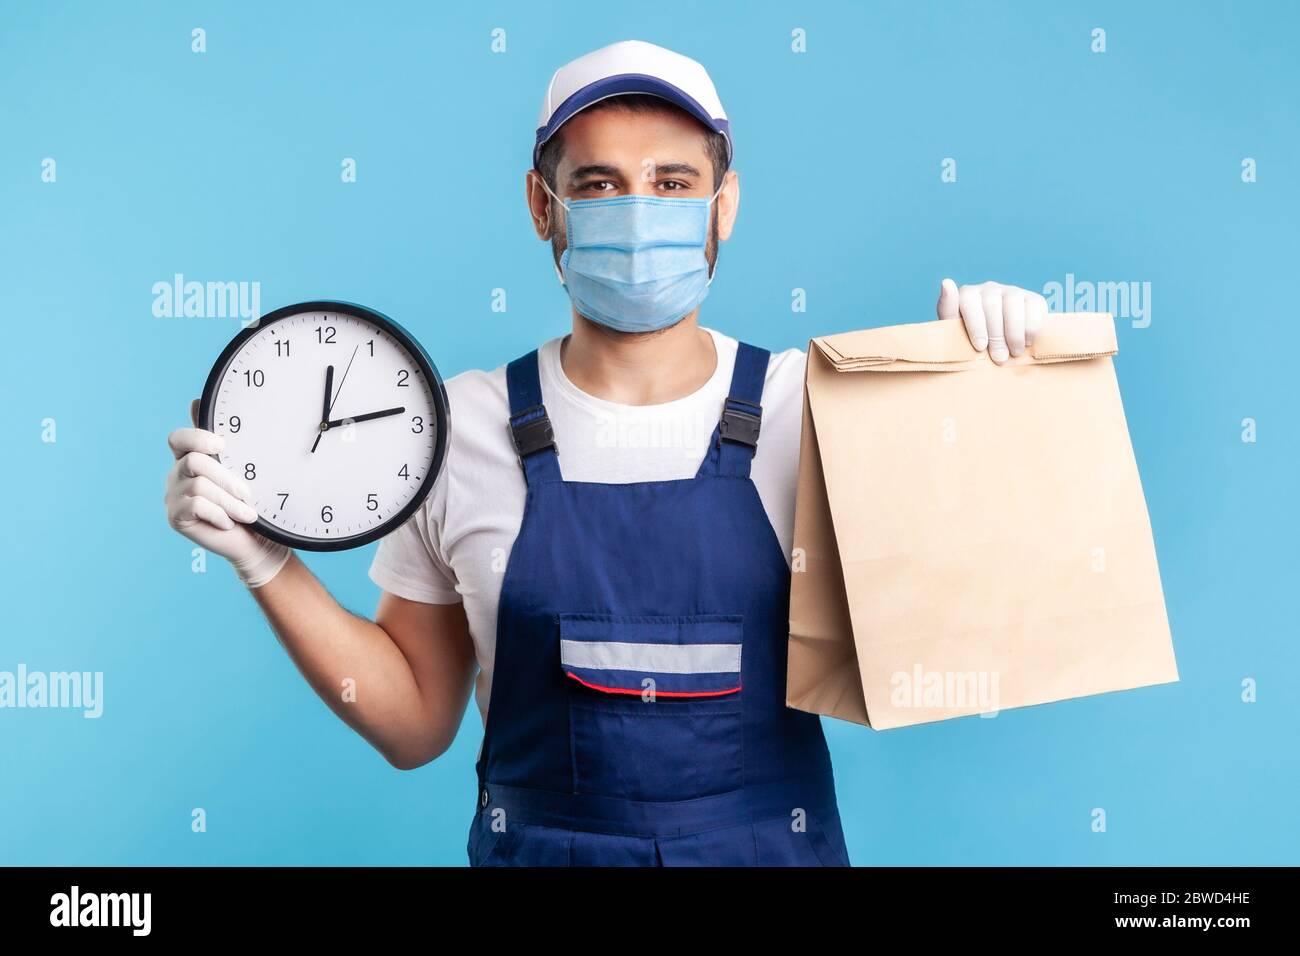 Food delivery, shipping on time! Portrait of handyman in uniform, mask, gloves holding clock and parcel. Express courier transportation, post mail ser Stock Photo